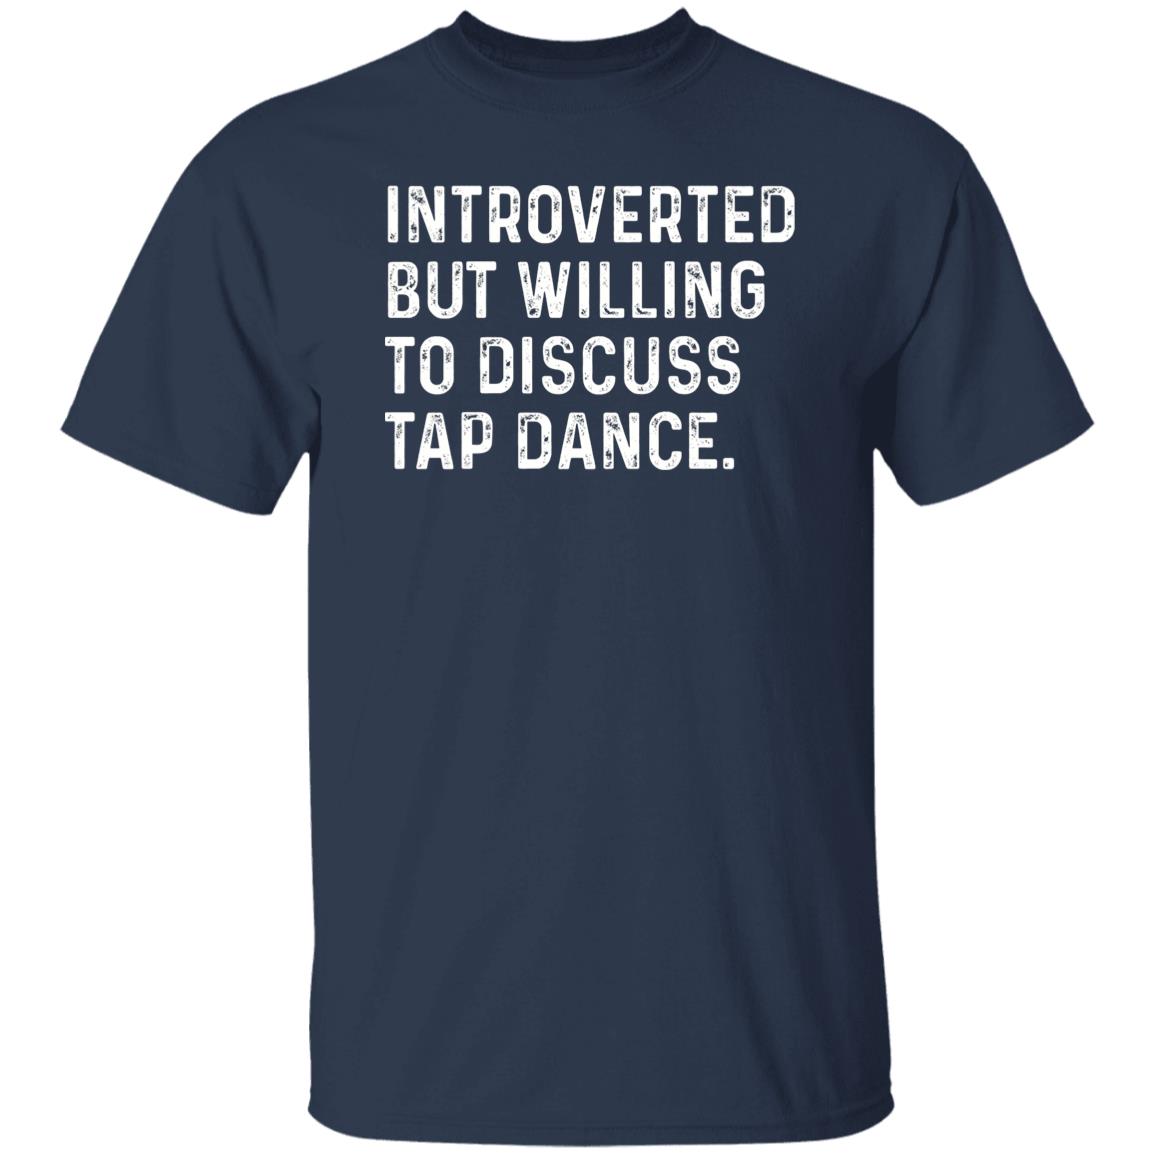 Introverted but willing to discuss Tap Dance Unisex T-shirt Tap Dancer tee Black Navy Dark Heather-Navy-Family-Gift-Planet